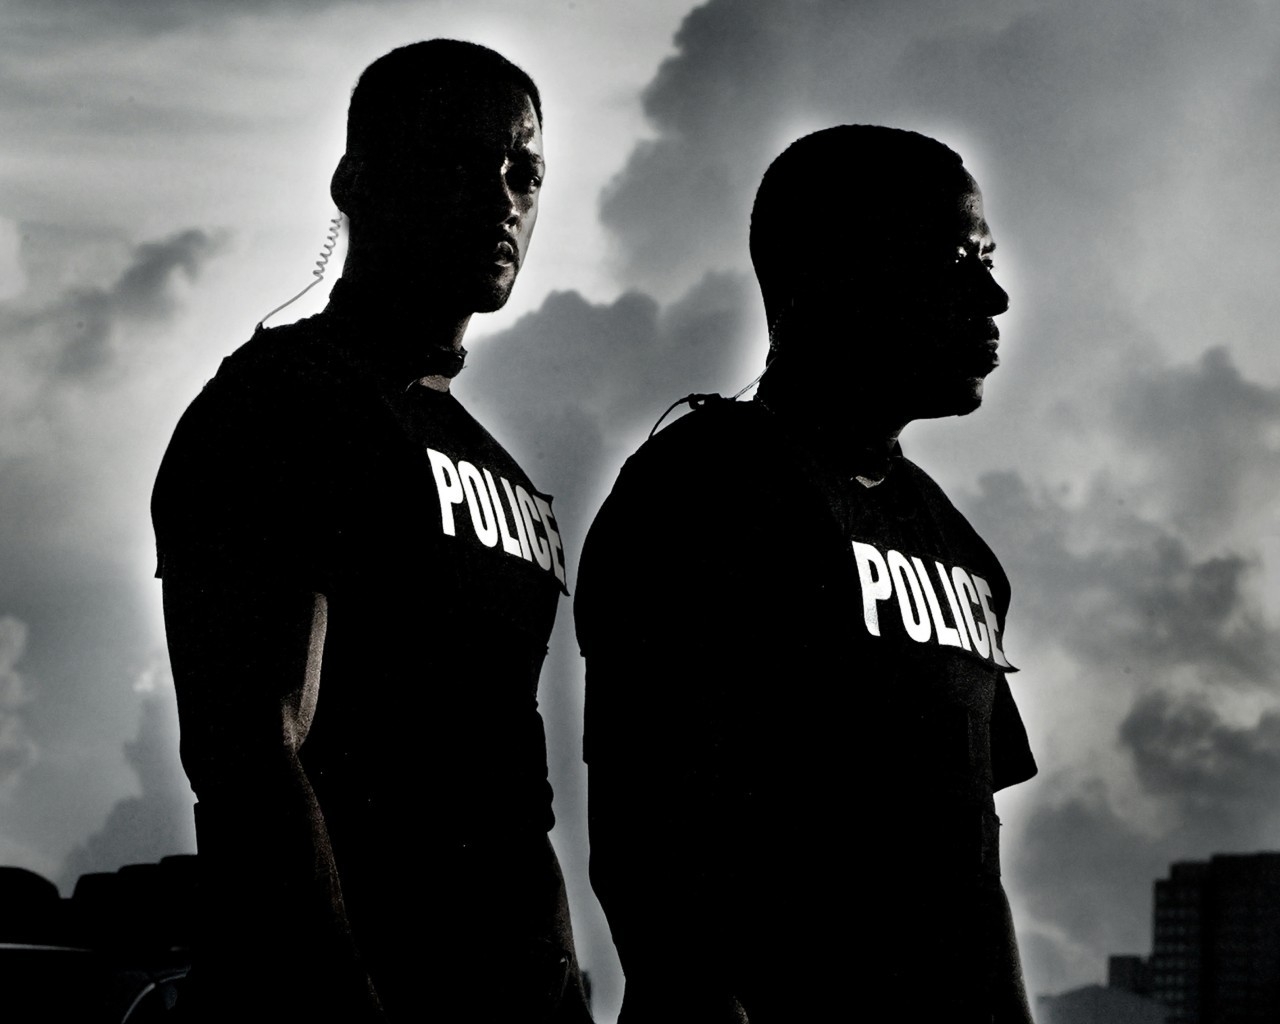 Bad Boys 2 Poster for 1280 x 1024 resolution